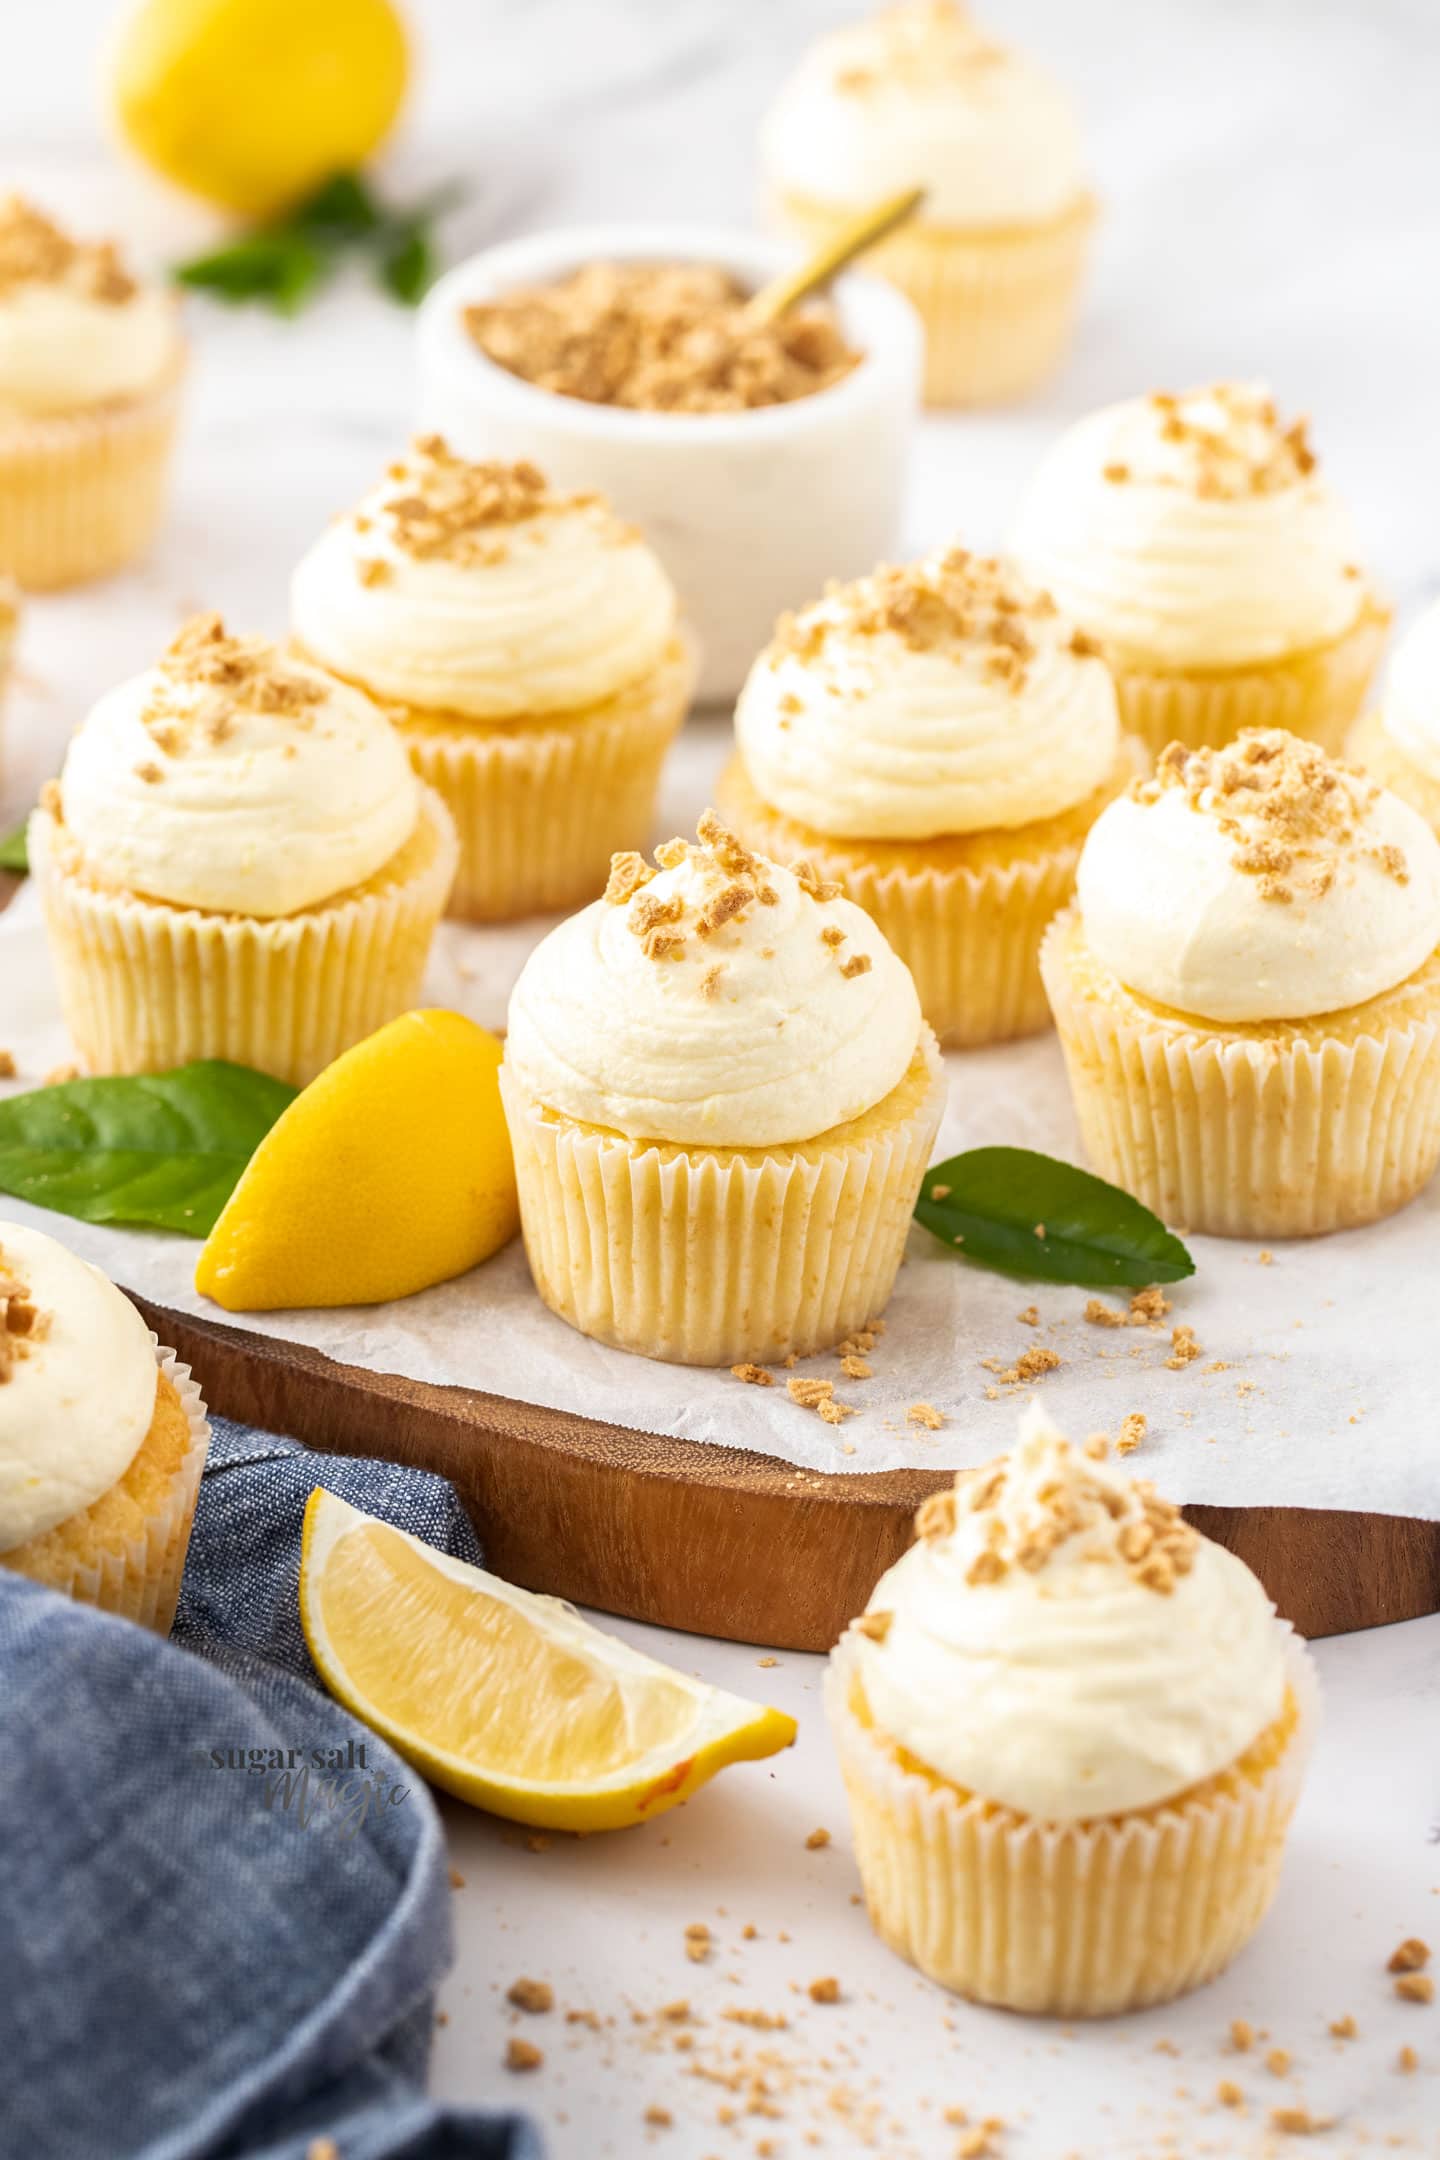 A batch of lemon cupcakes on a wooden board.